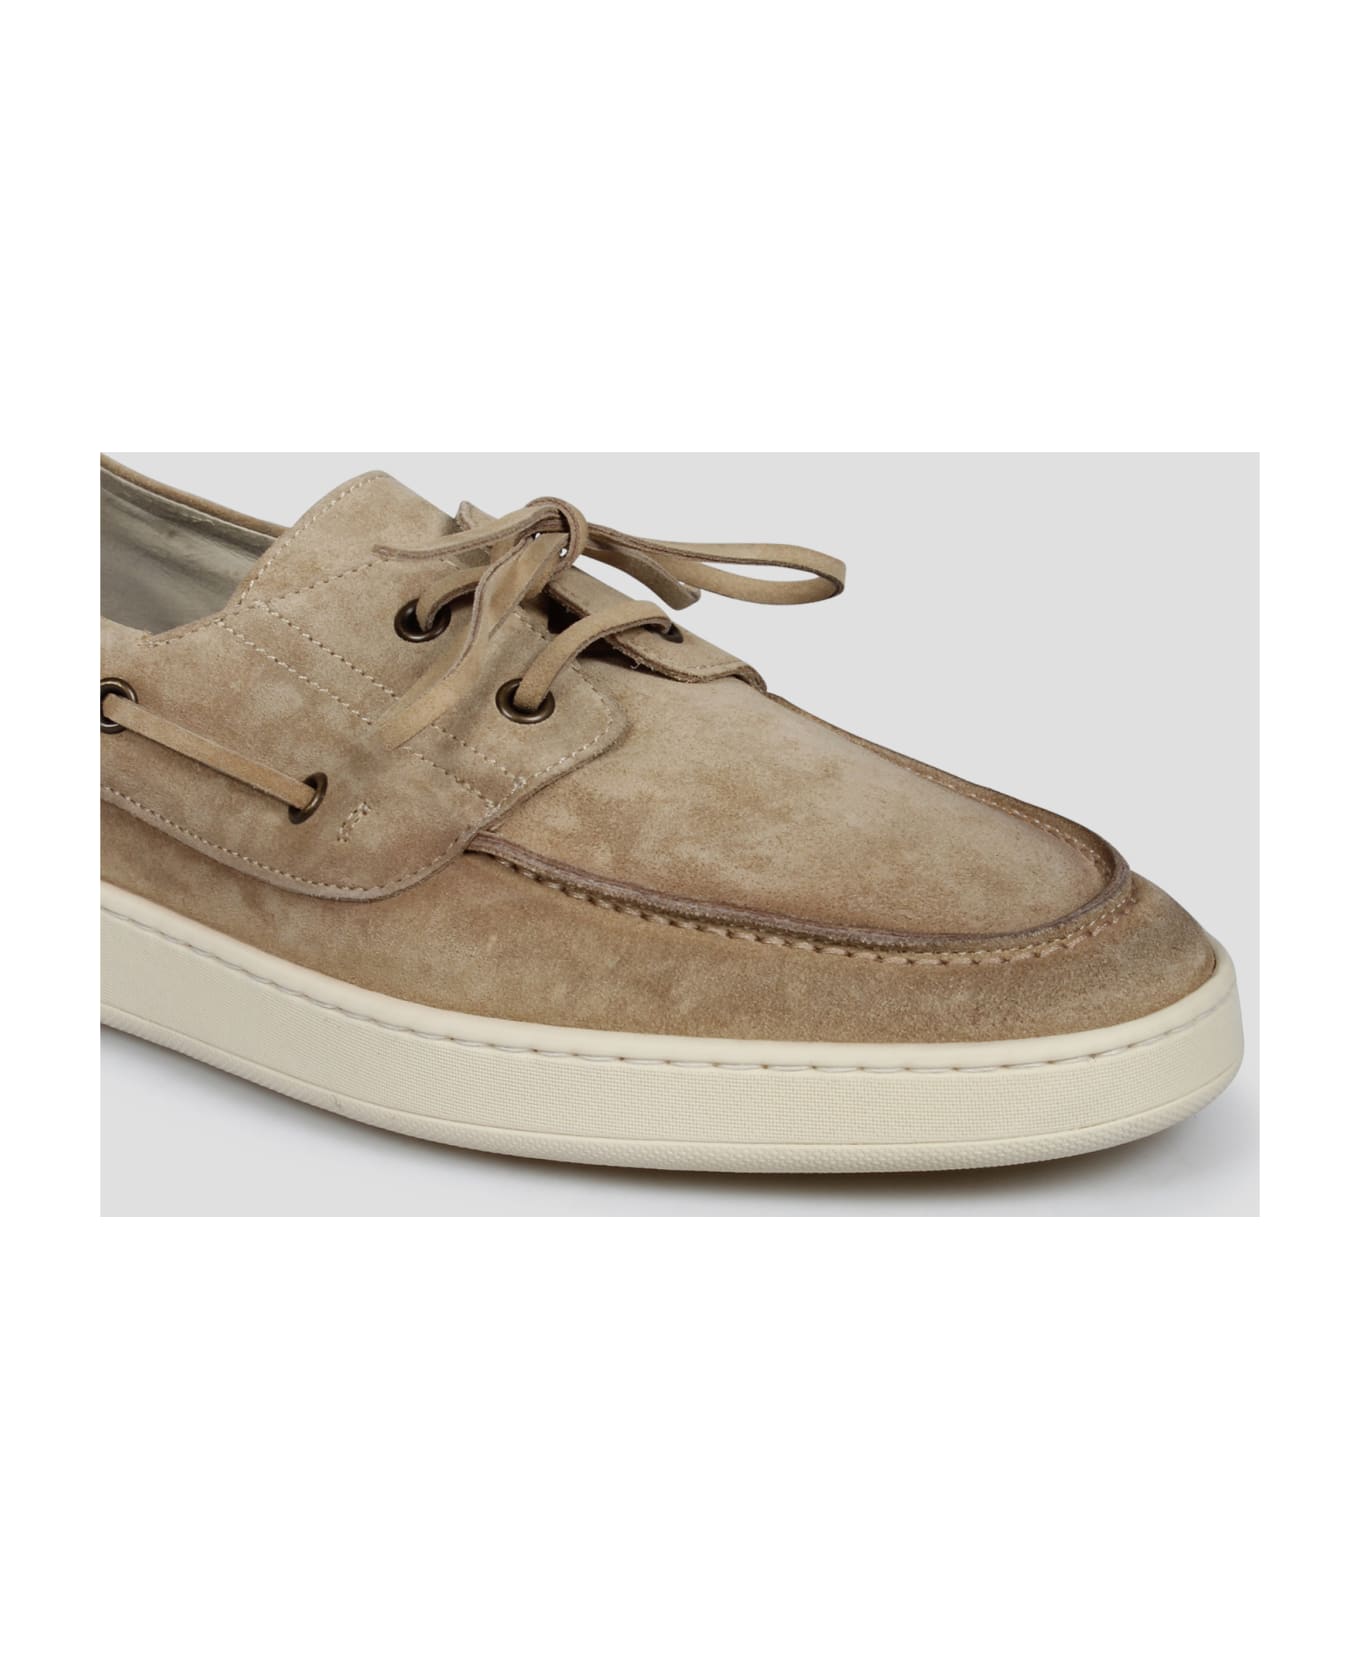 Corvari Suede Boat Loafers - Light Brown